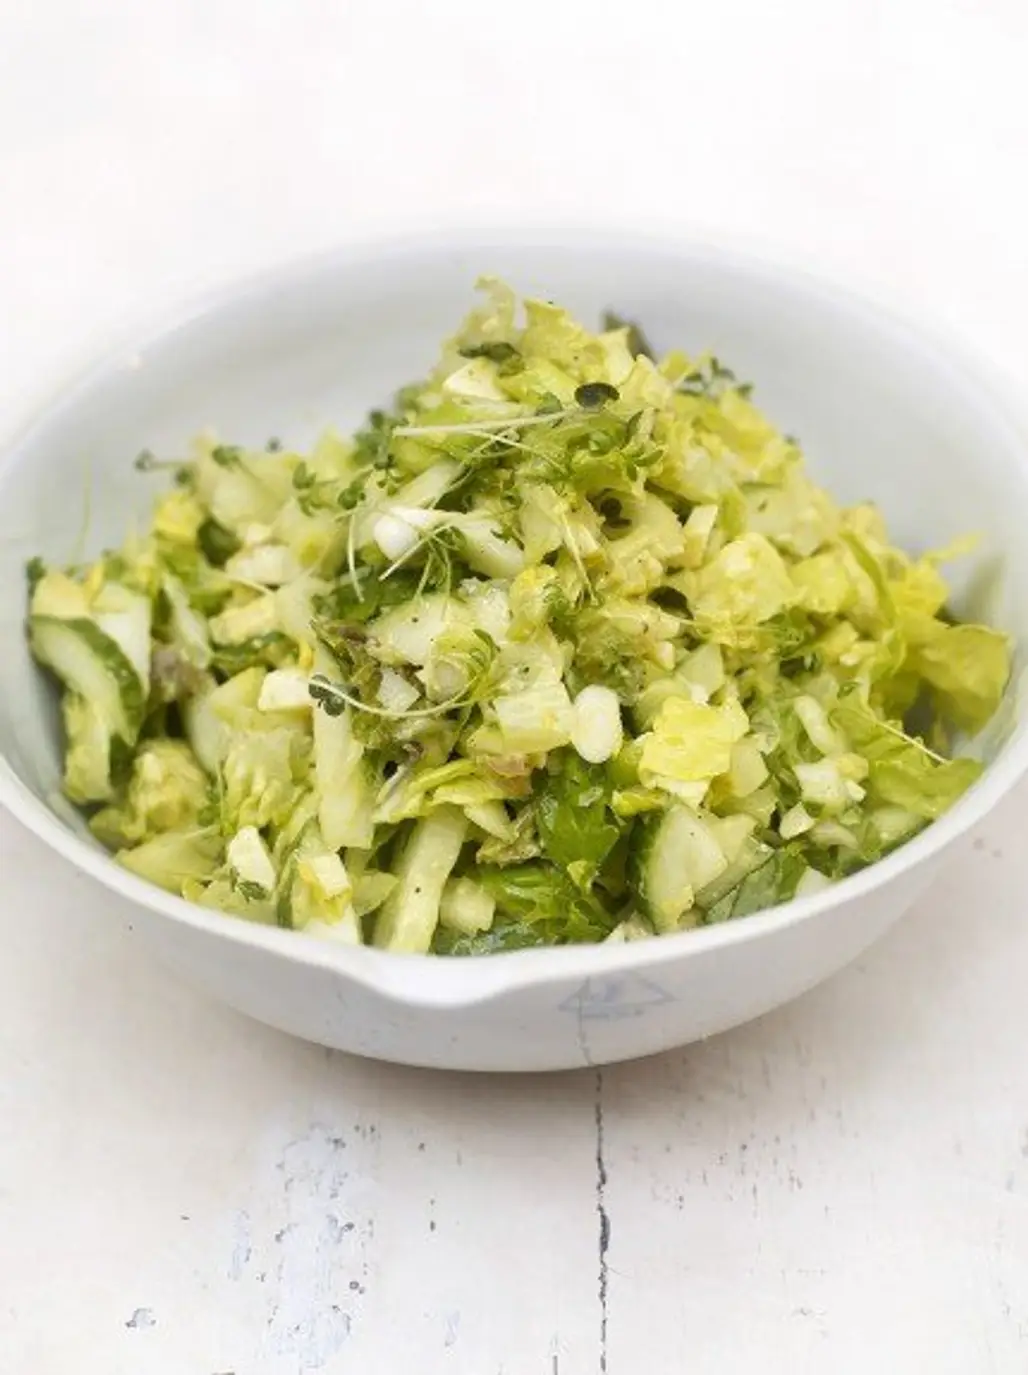 Jamie Oliver’s Chopped Green Salad